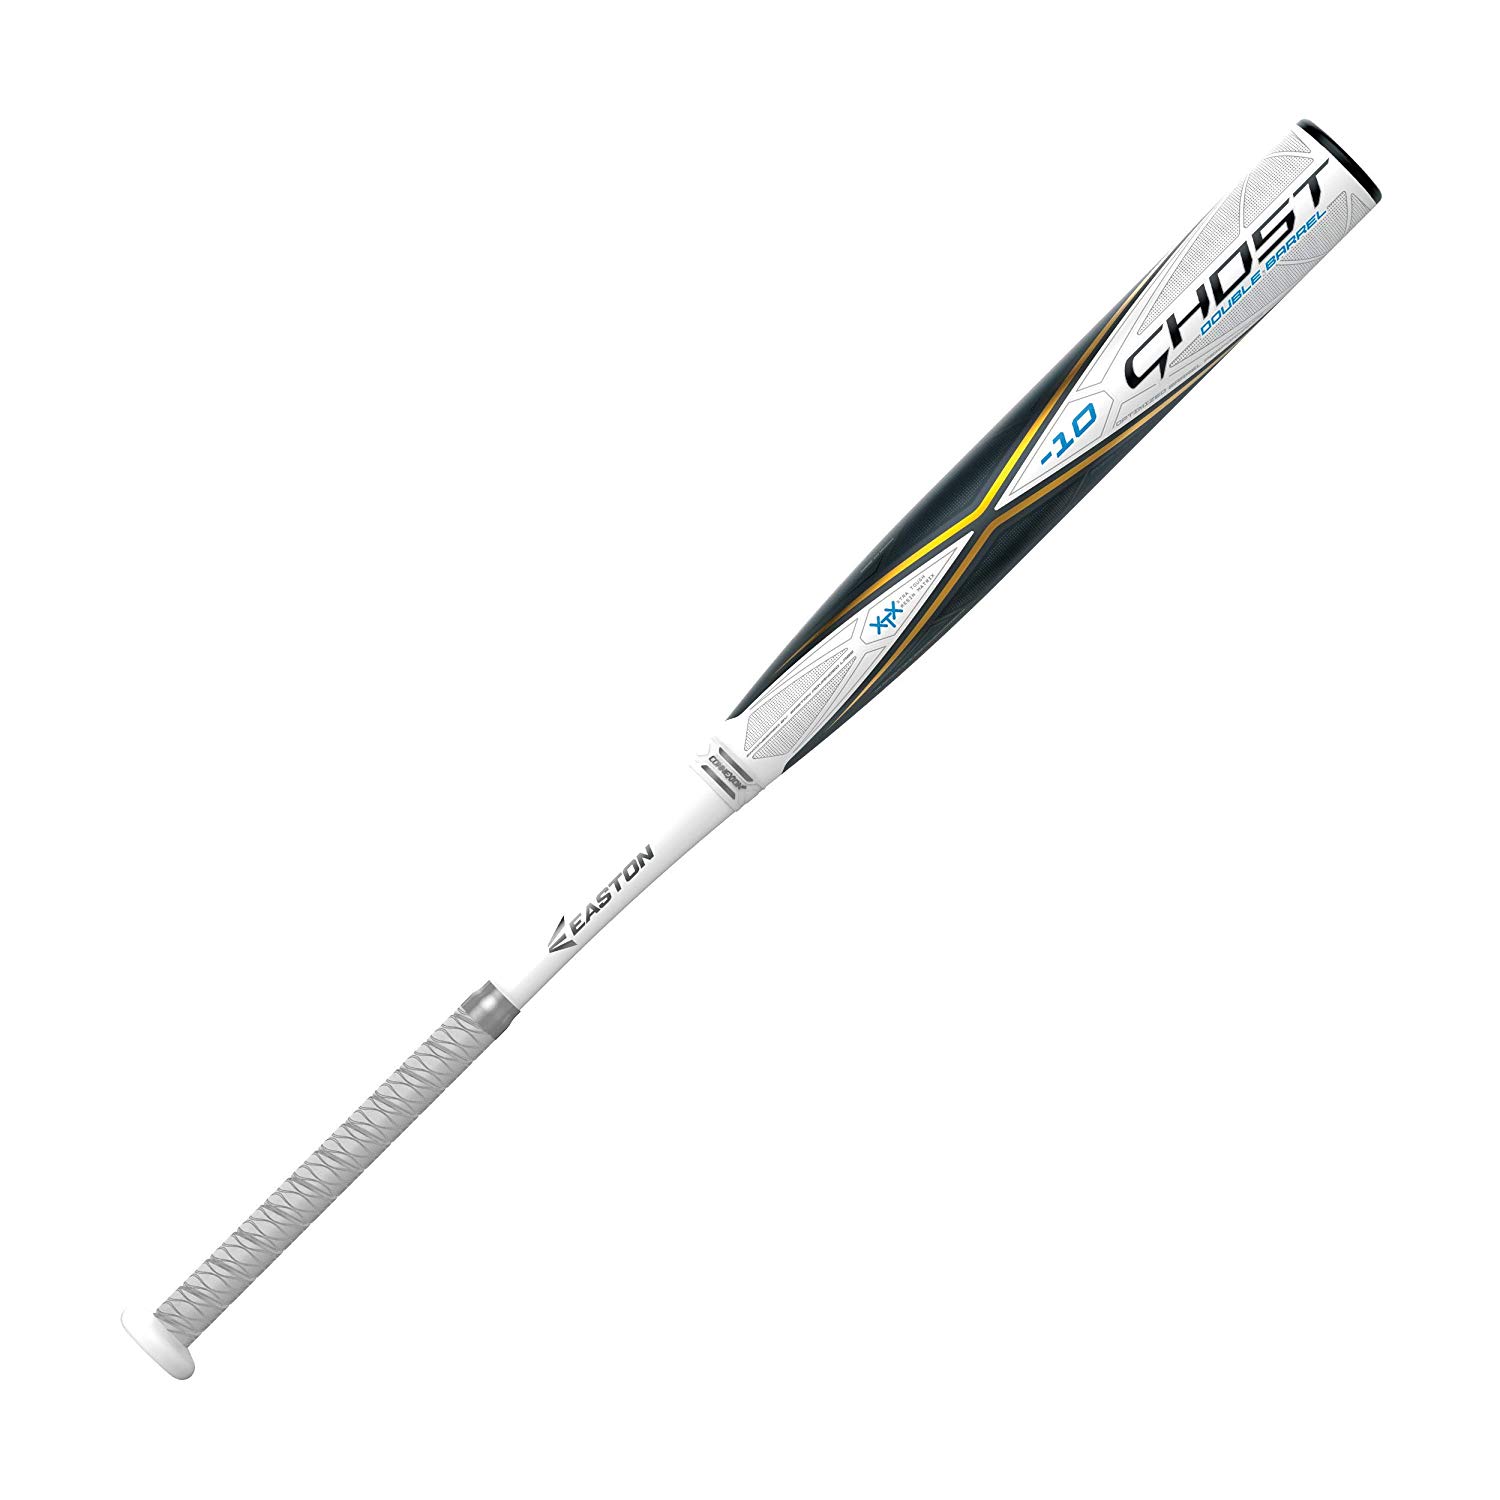 easton-ghost-11-fastpitch-softball-bat-2020-dual-stamp-33-inch-22-oz FP20GH112020-3322 Easton 628412264034 Patent-pending Double Barrel construction is the ultimate combination of feel pop